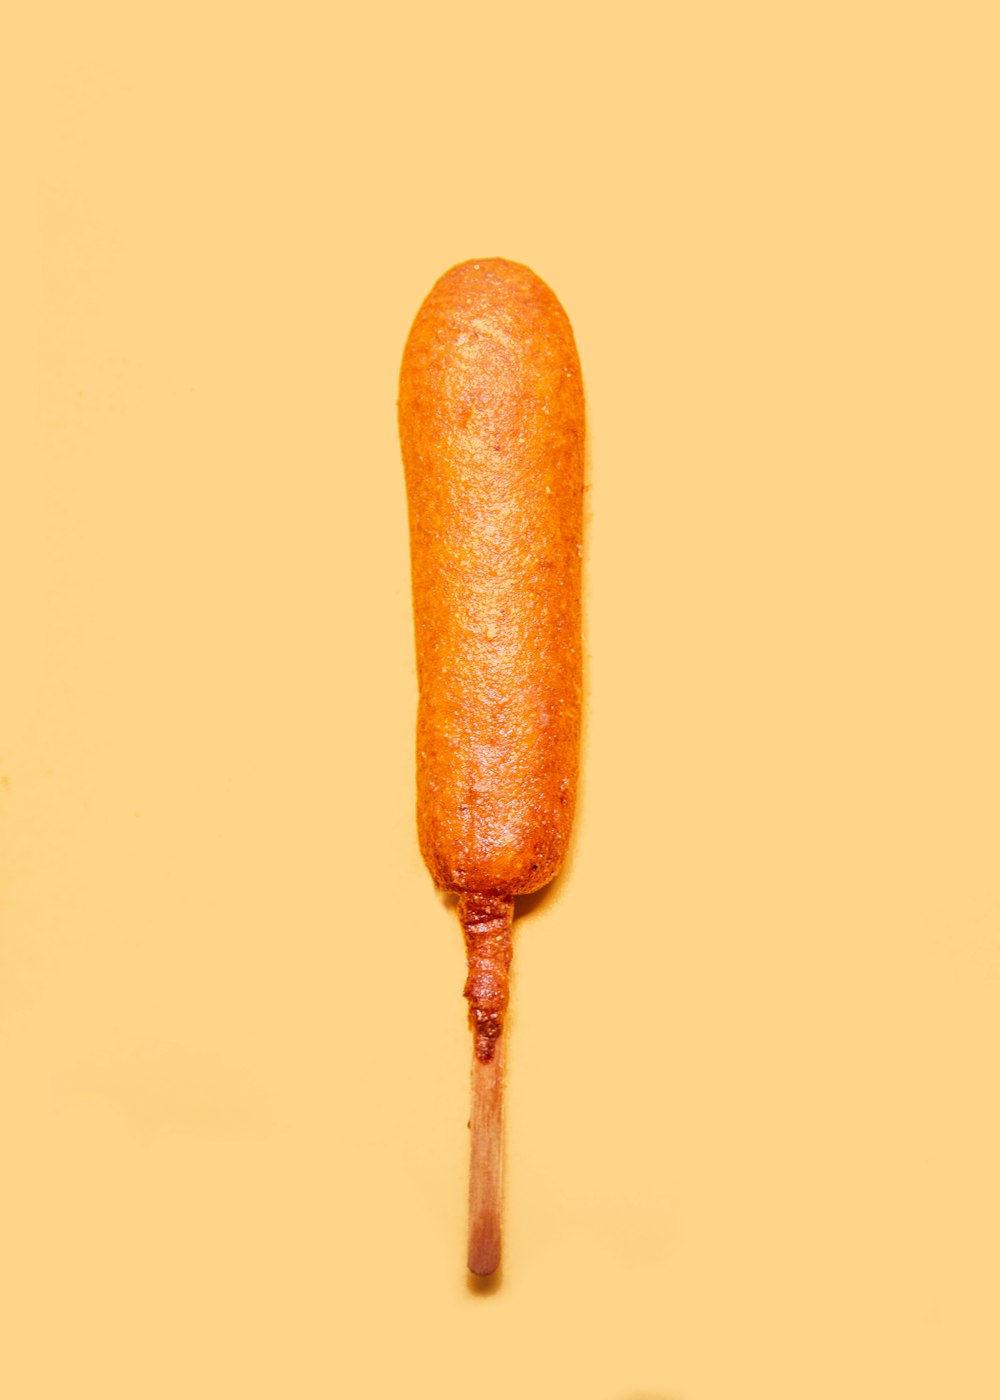 barbecue sausage